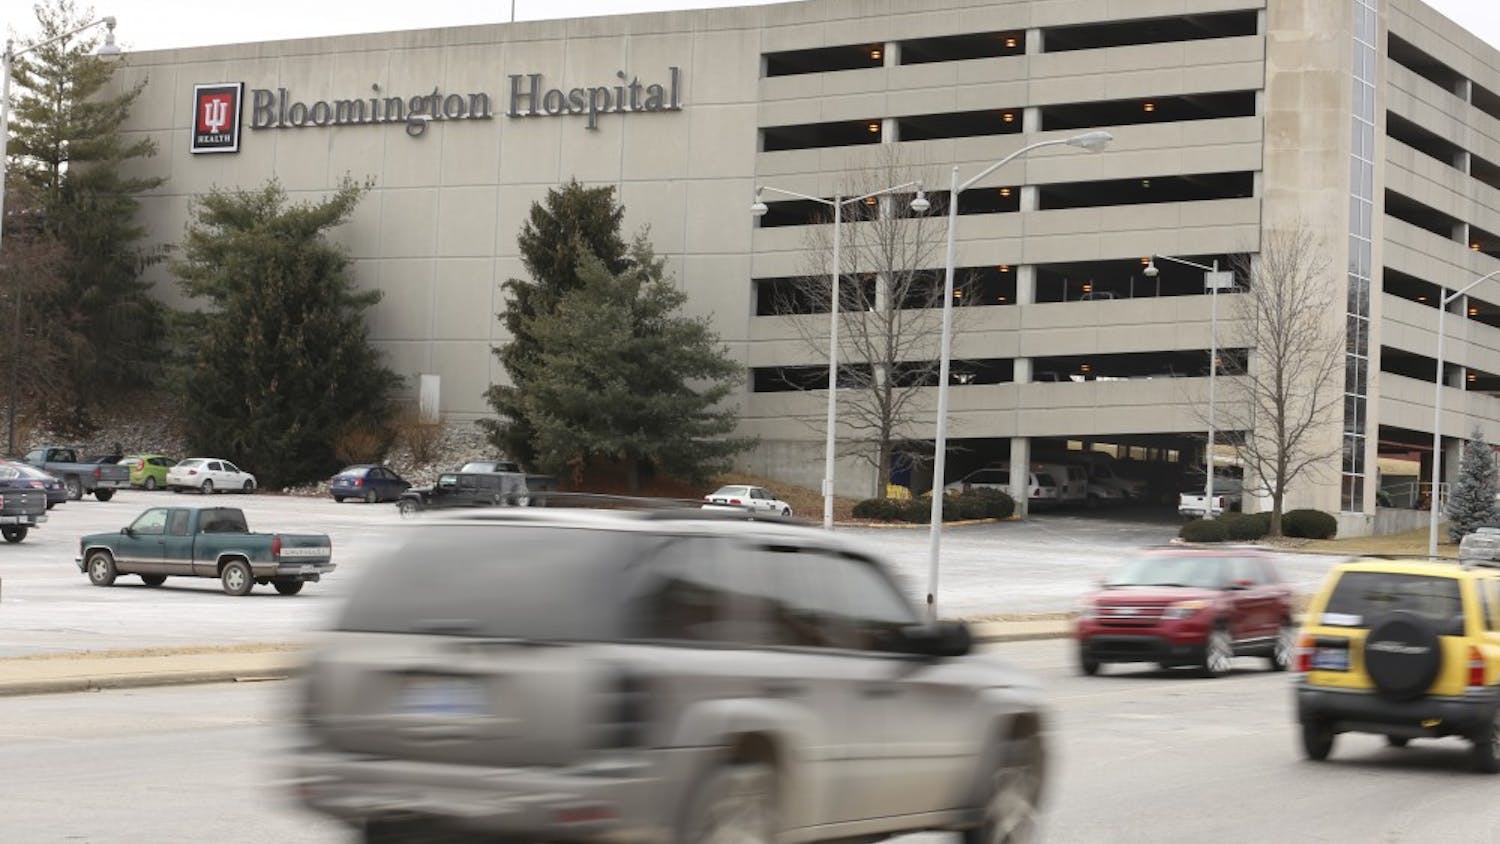 The IU Health Bloomington Hospital is currently located at the corner of Second and Rogers streets. The City of Bloomington intends to pay $6.5 million to repurpose the property for community use.